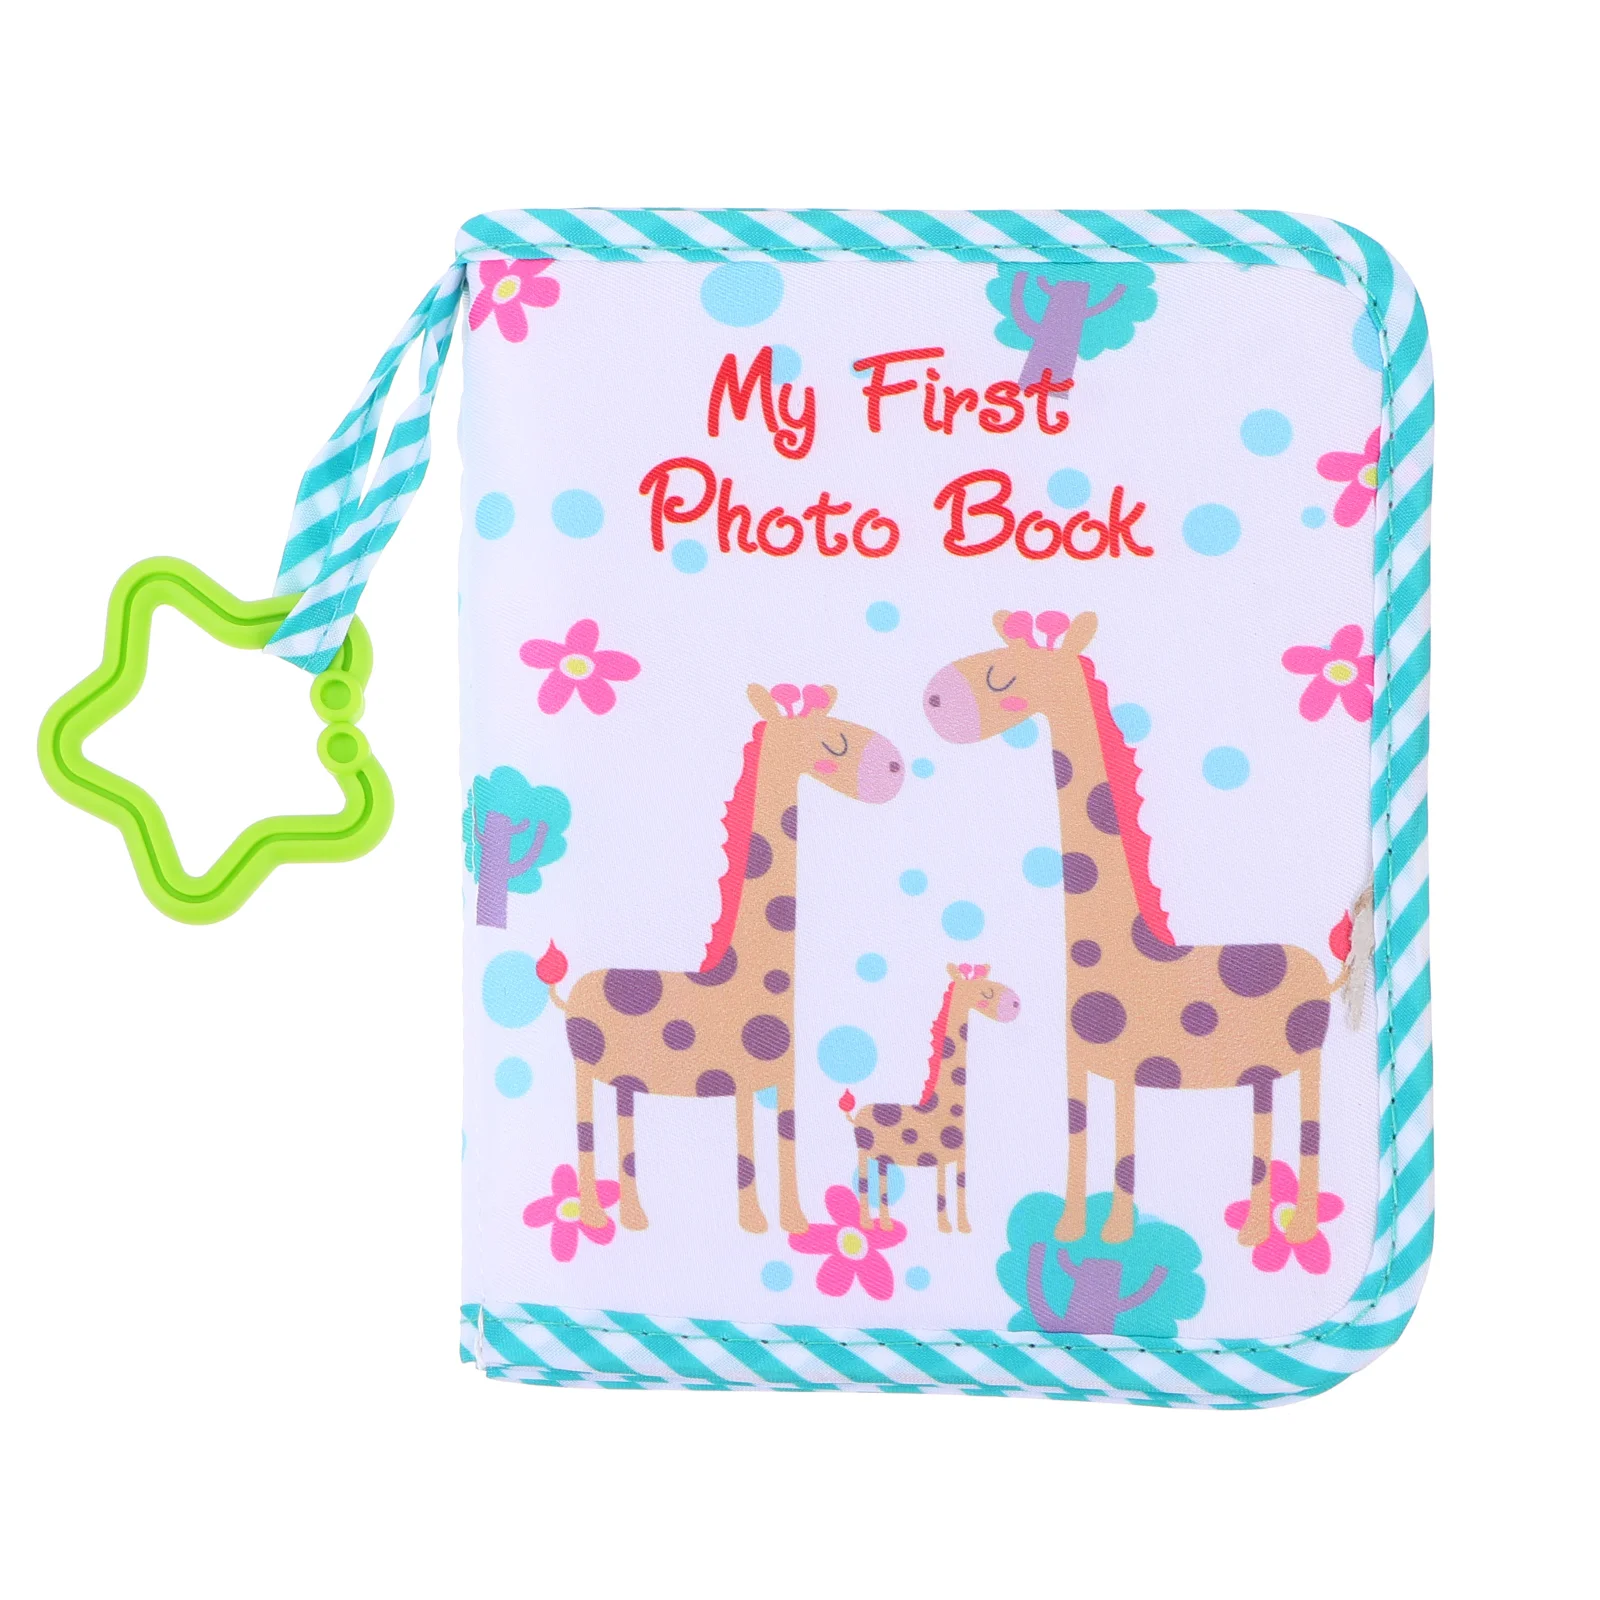 

Album Baby Photo Book First Books Memory Year Family My Picture Albums Cloth Fabric Growth Diy Babys Babies Photos Shower Guest